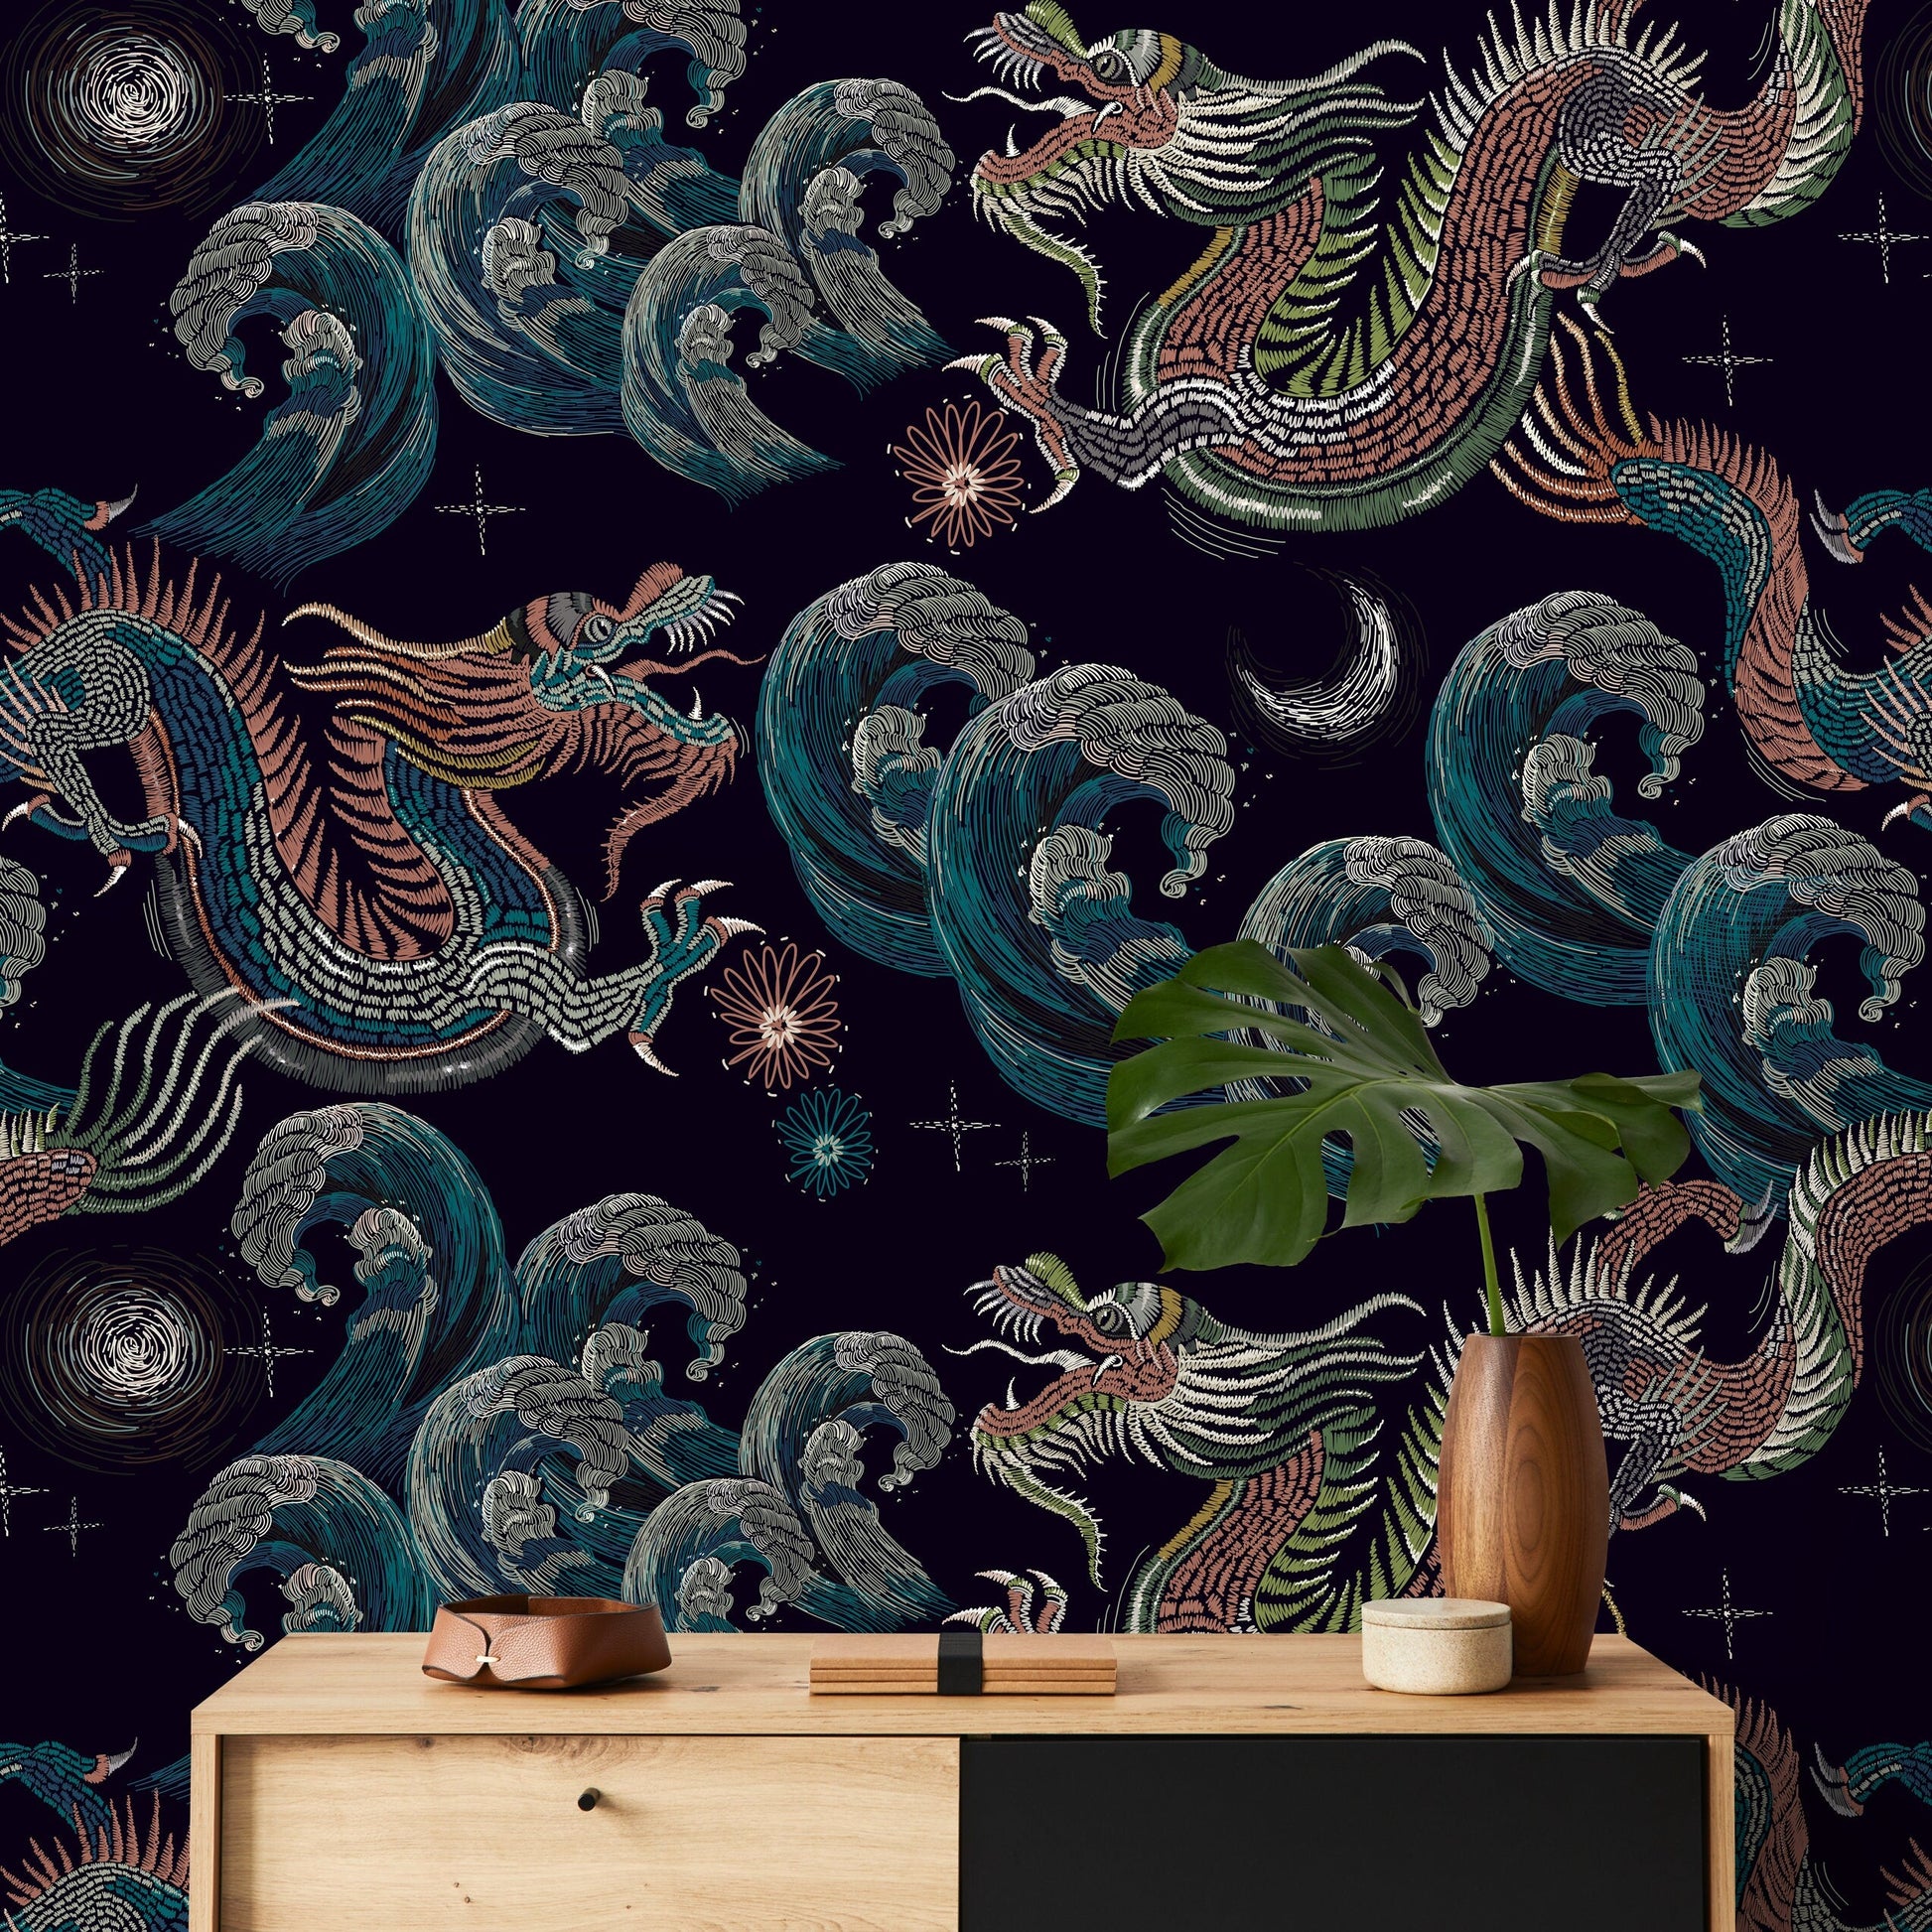 Celestial Chinoiserie Wallpaper Vintage Dragon Wallpaper Peel and Stick and Traditional Wallpaper - D878